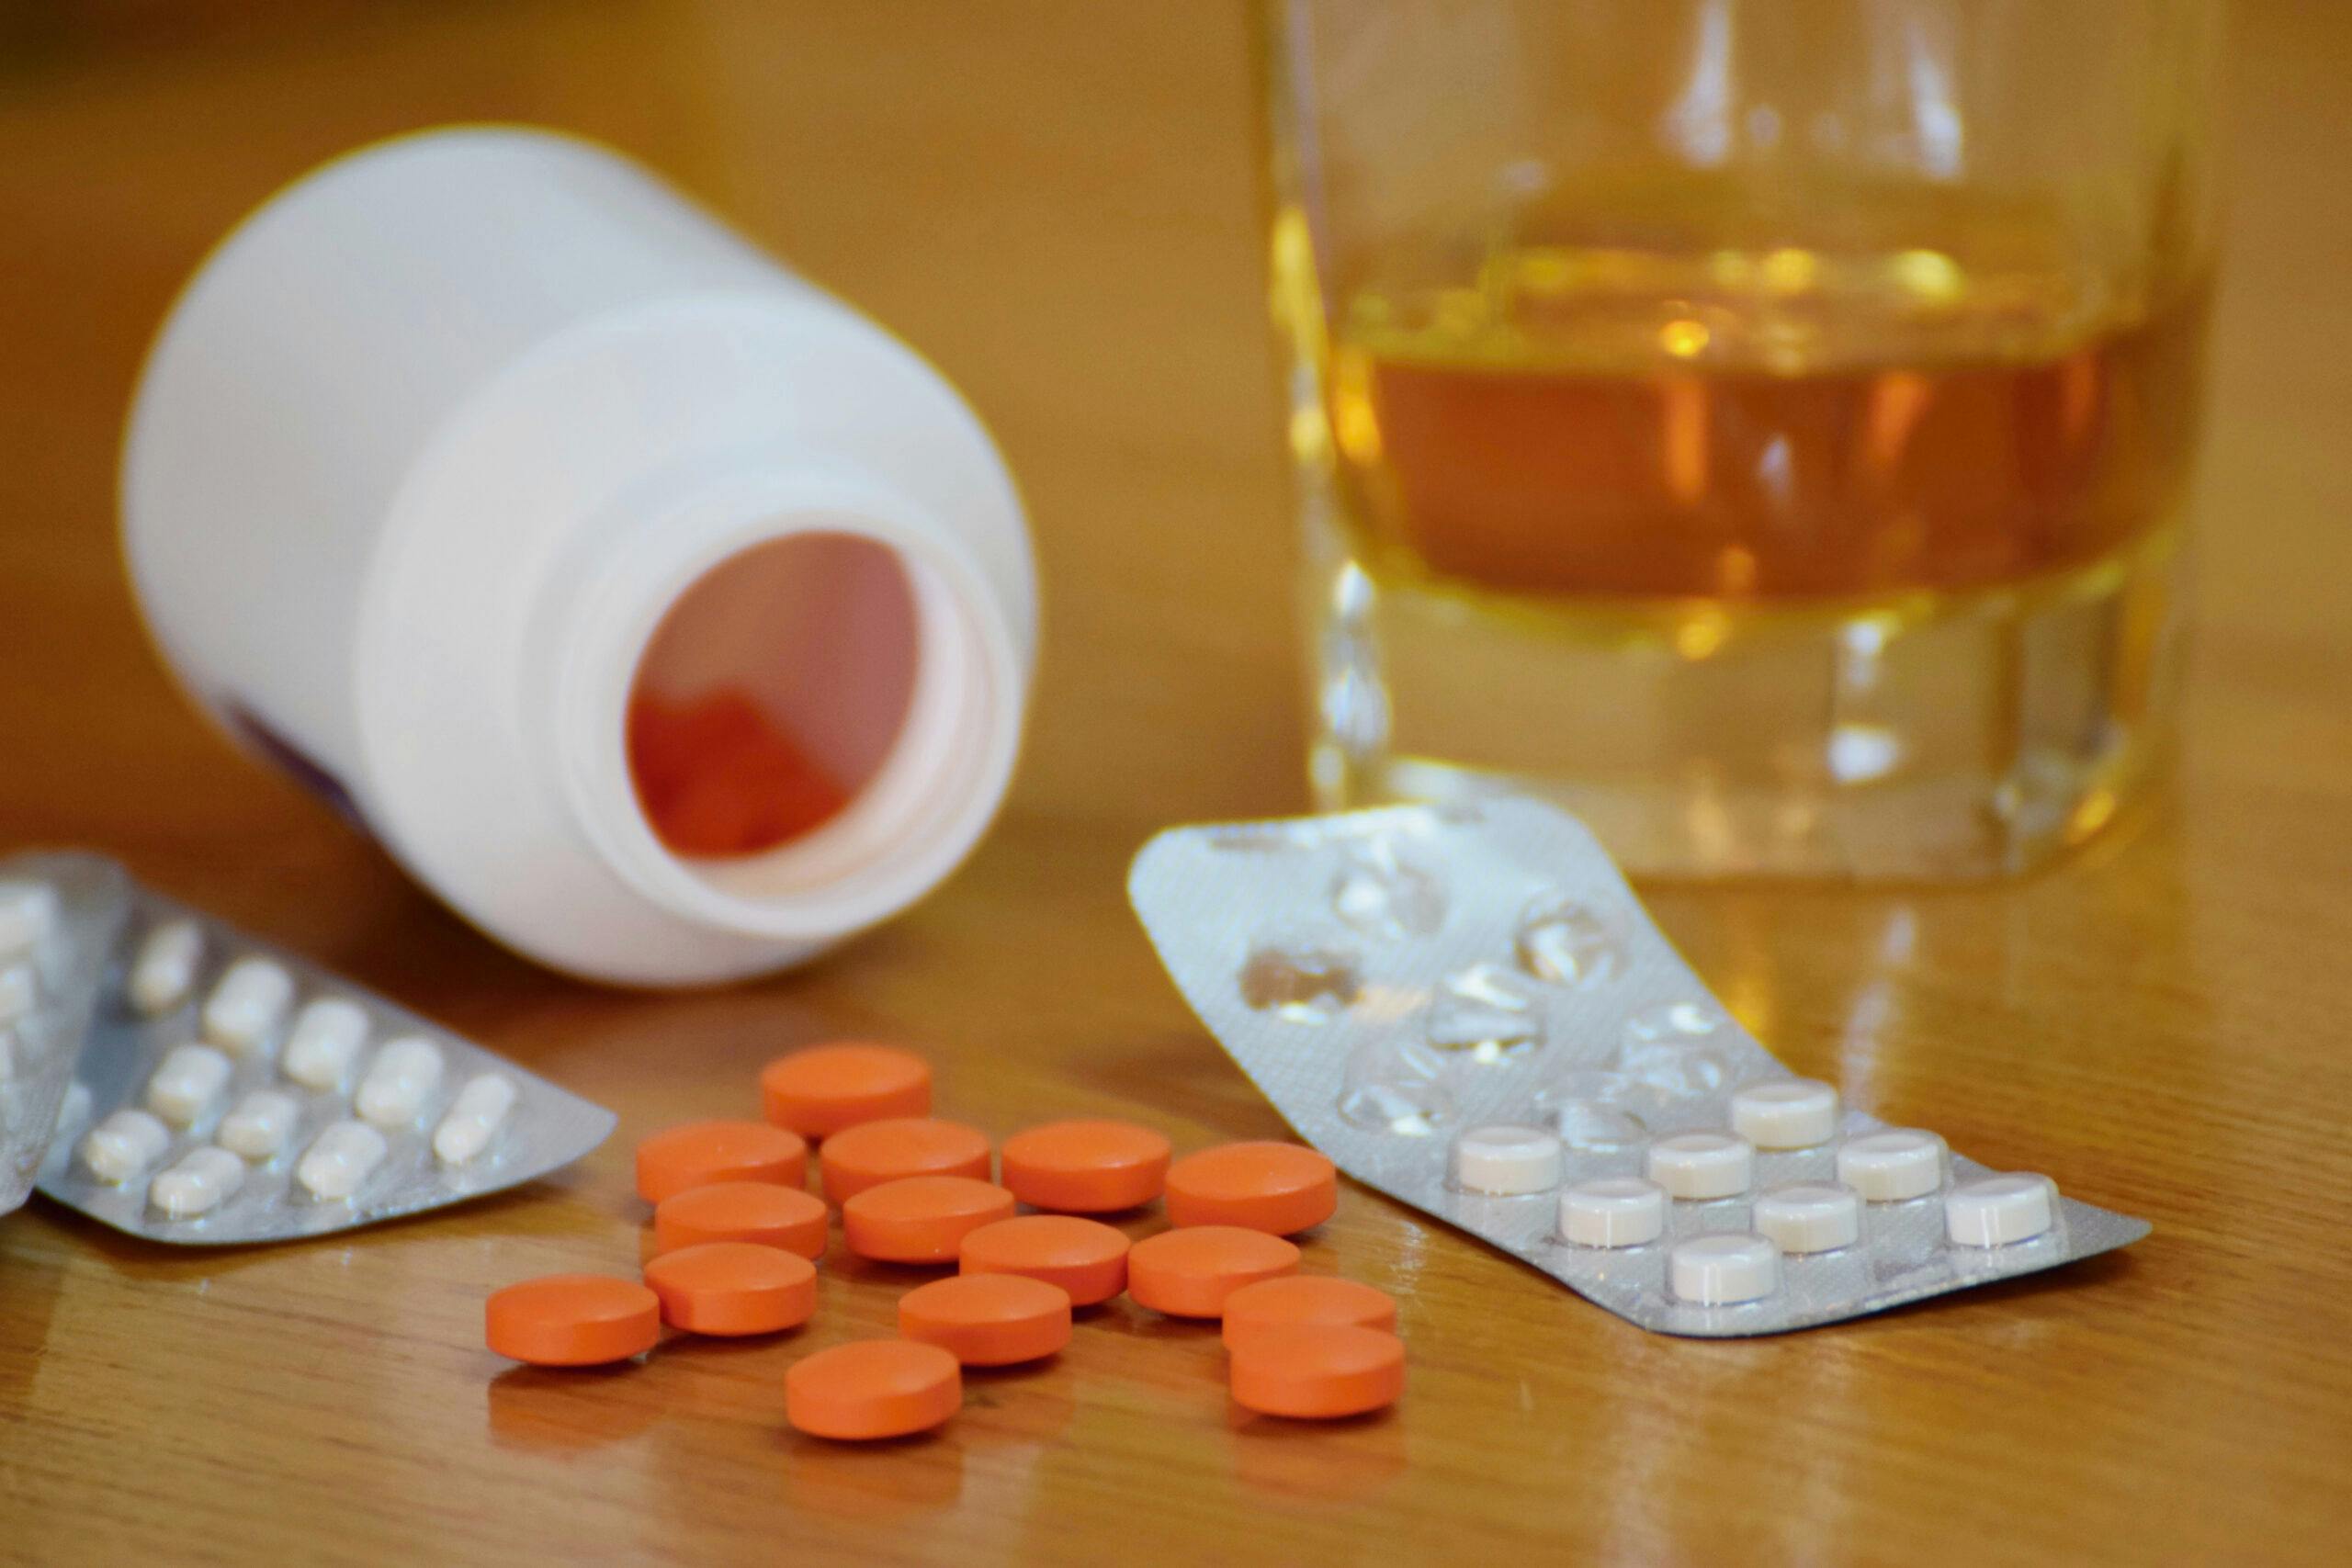 liquor in glass with orange and white pills